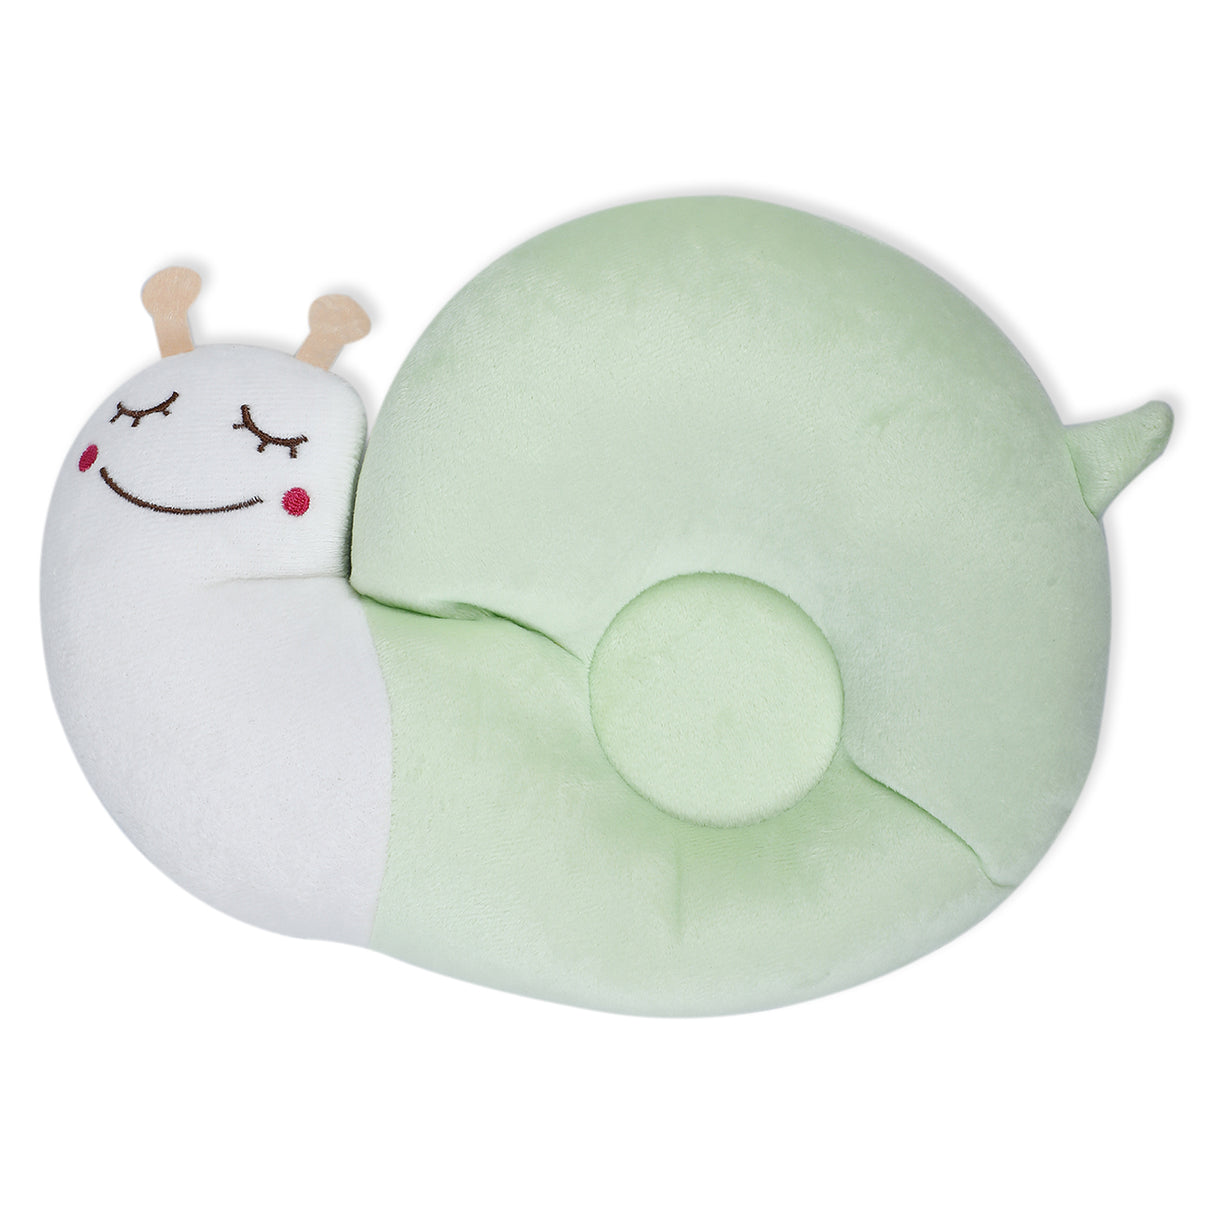 Snail Playful Soft And Cozy Pillow